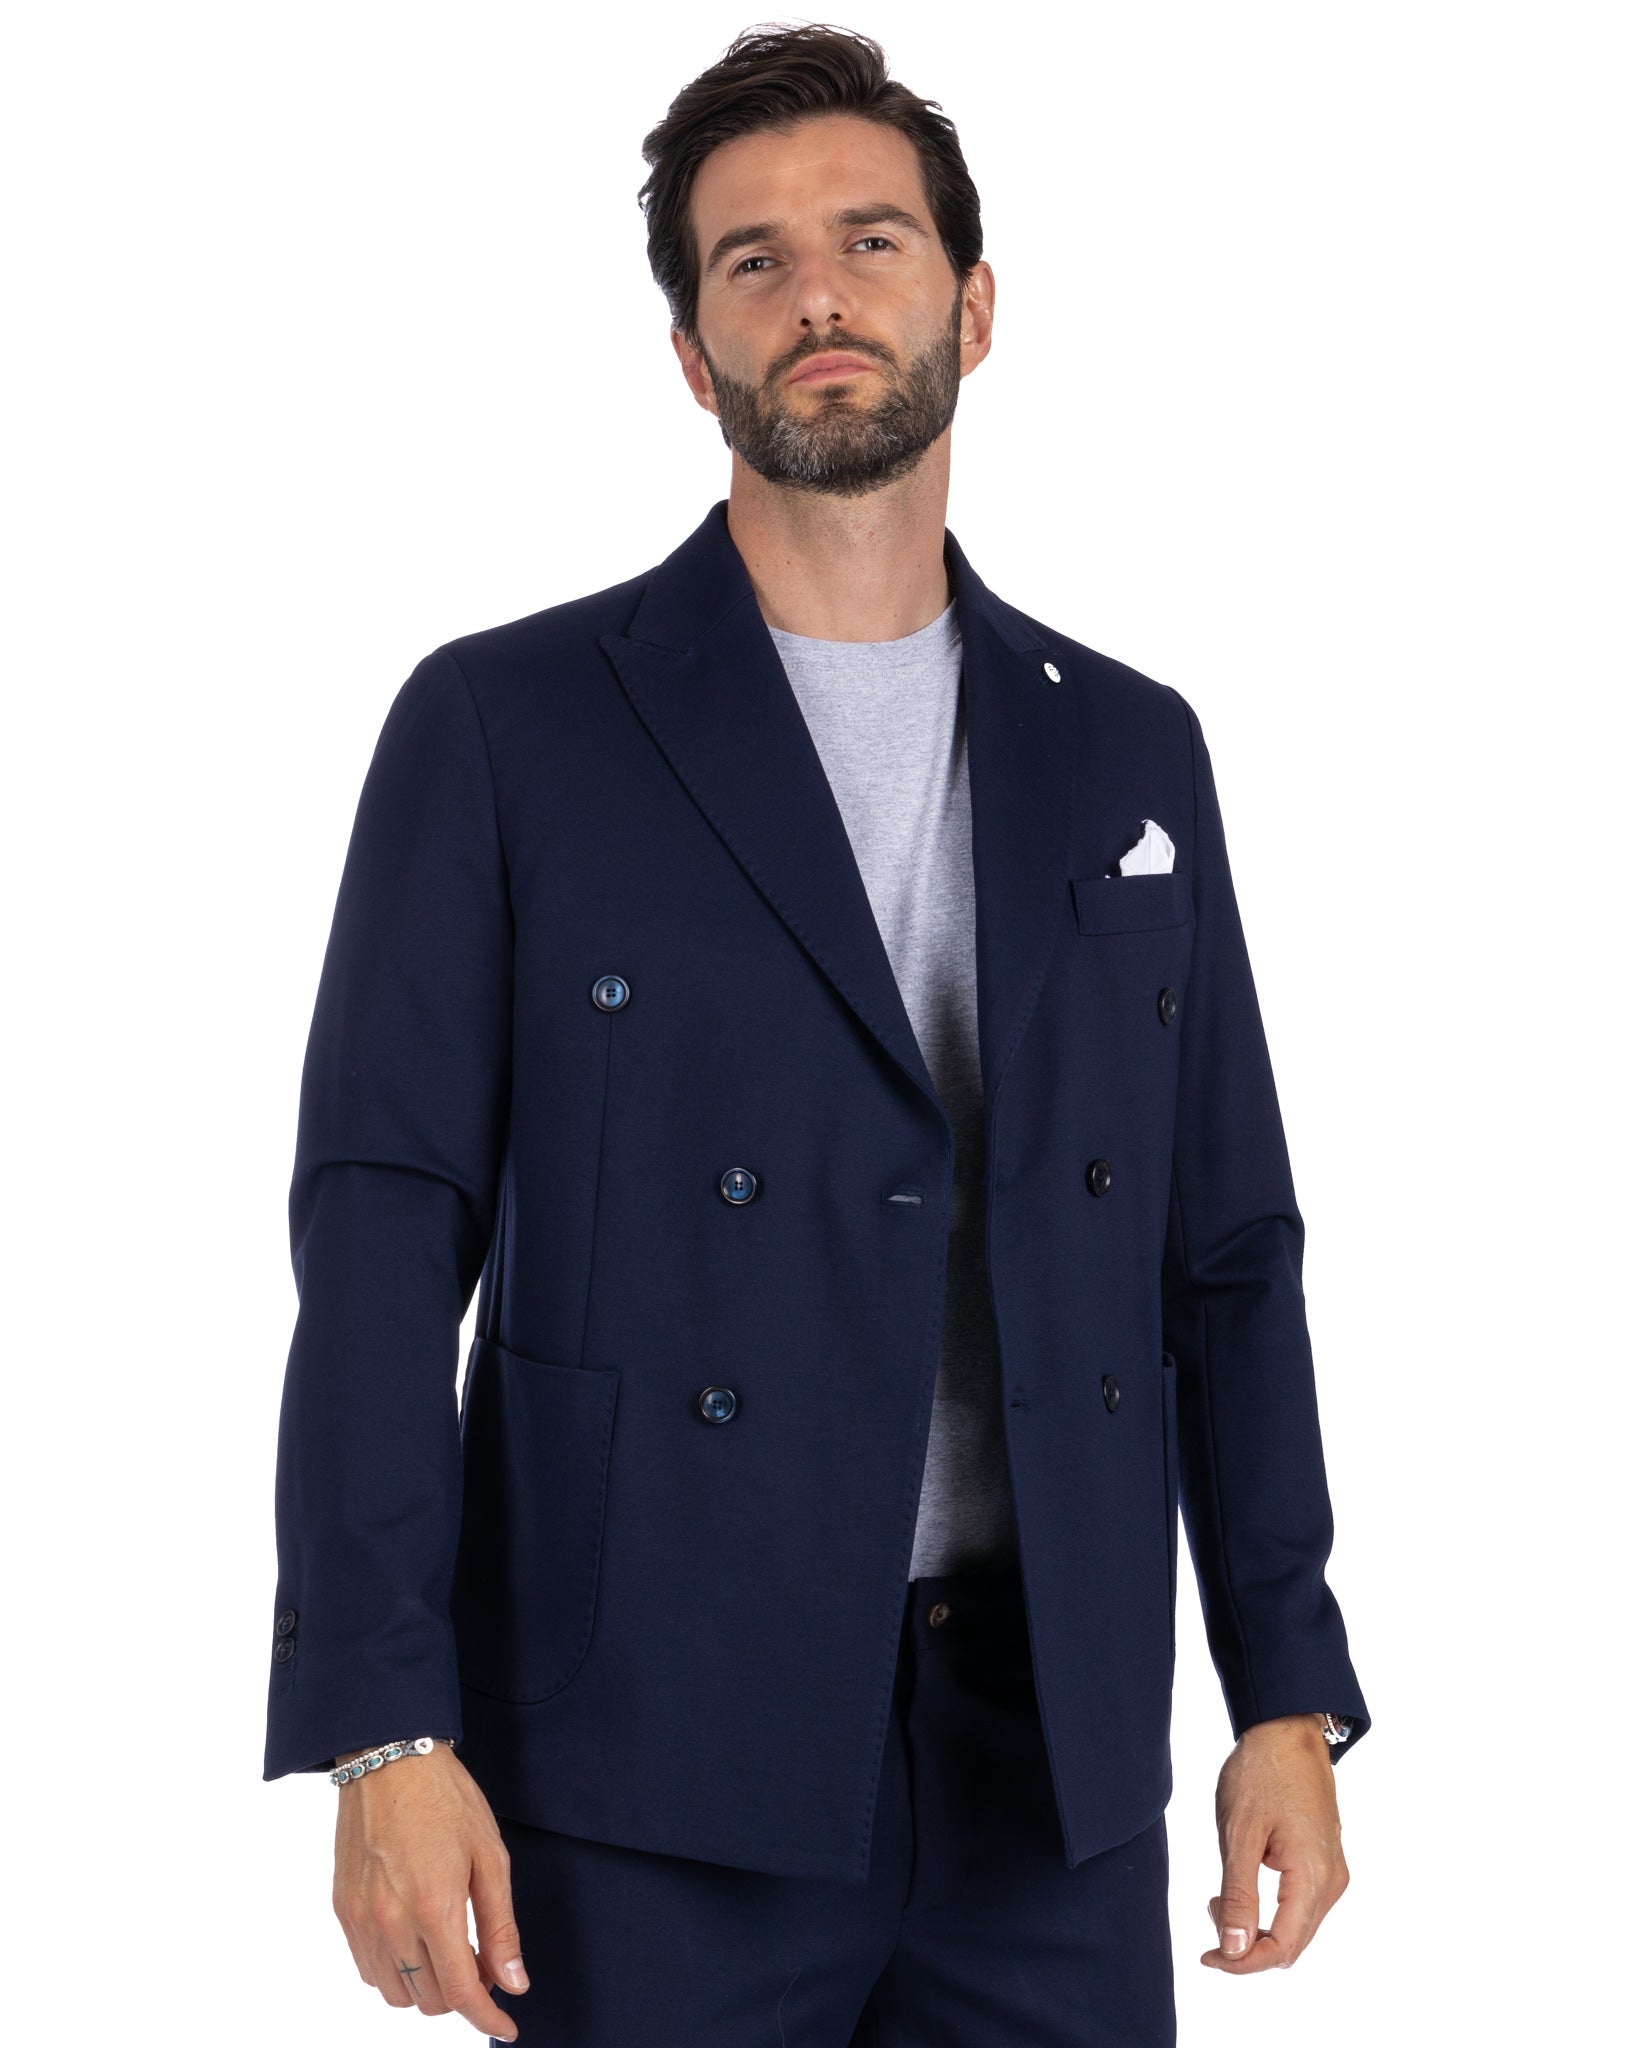 Mustang - blue milan stitch double-breasted jacket